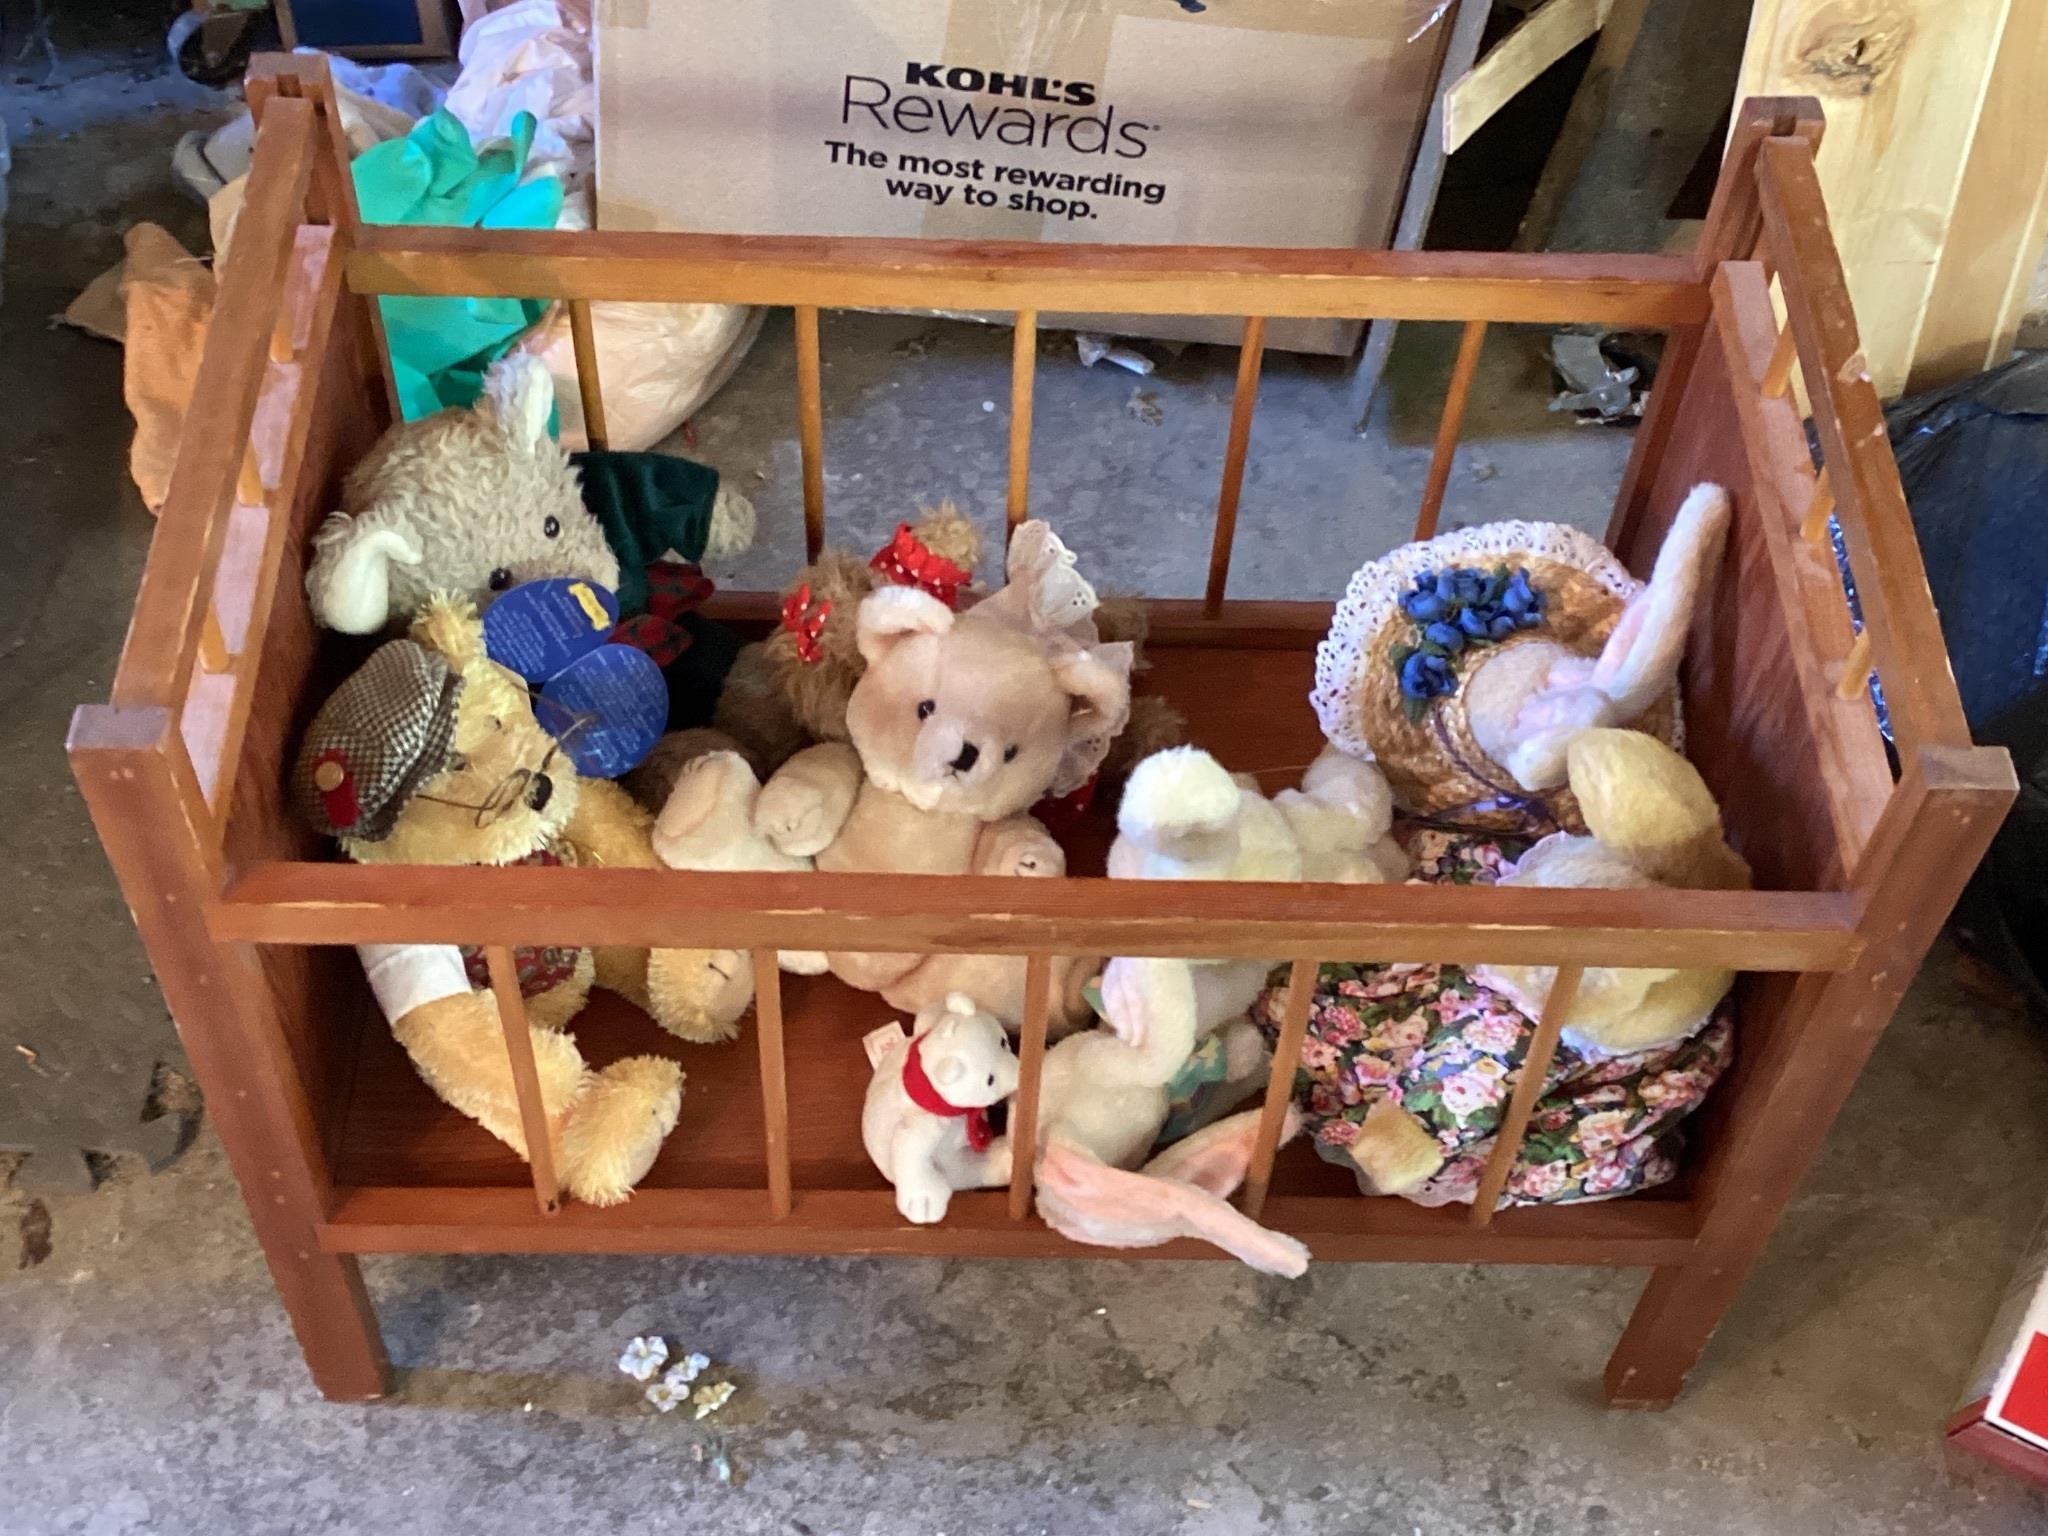 Collection of bears and baby crib